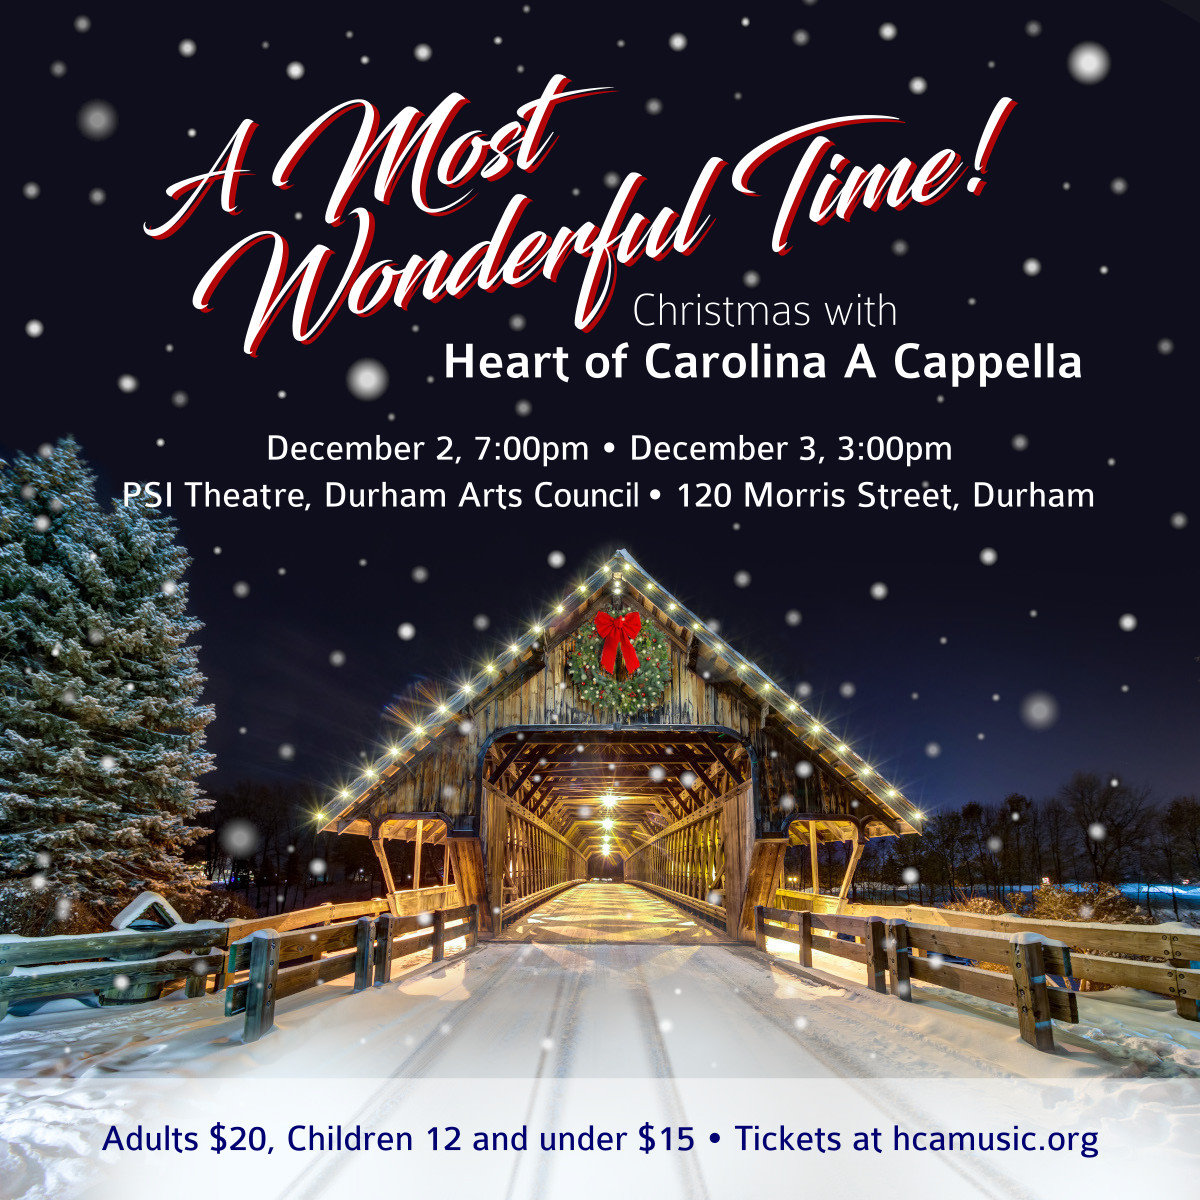 A Most Wonderful Time! Christmas with Heart of Carolina A Cappella.  Friday, December 2 at 7pm and Saturday, December 3 at 3pm in the PSI Theater at Durham Arts Council, 120 Morris Street, Durham. Tickets $15 for children, $20 for adults.  Tickets available at the door.